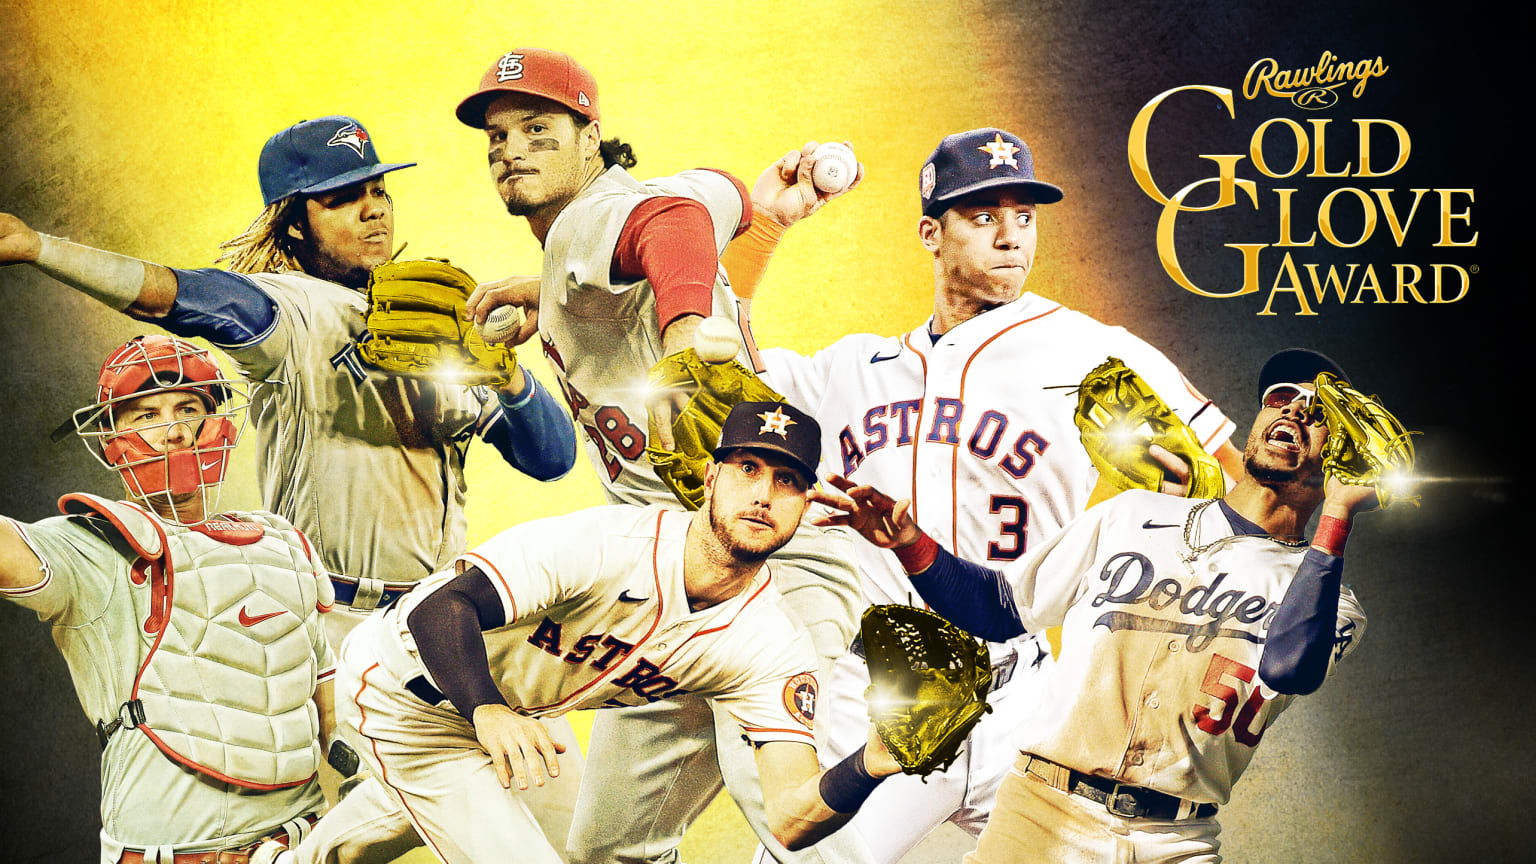 Six players are pictured making defensive plays alongside the Rawlings Gold Glove Award logo.